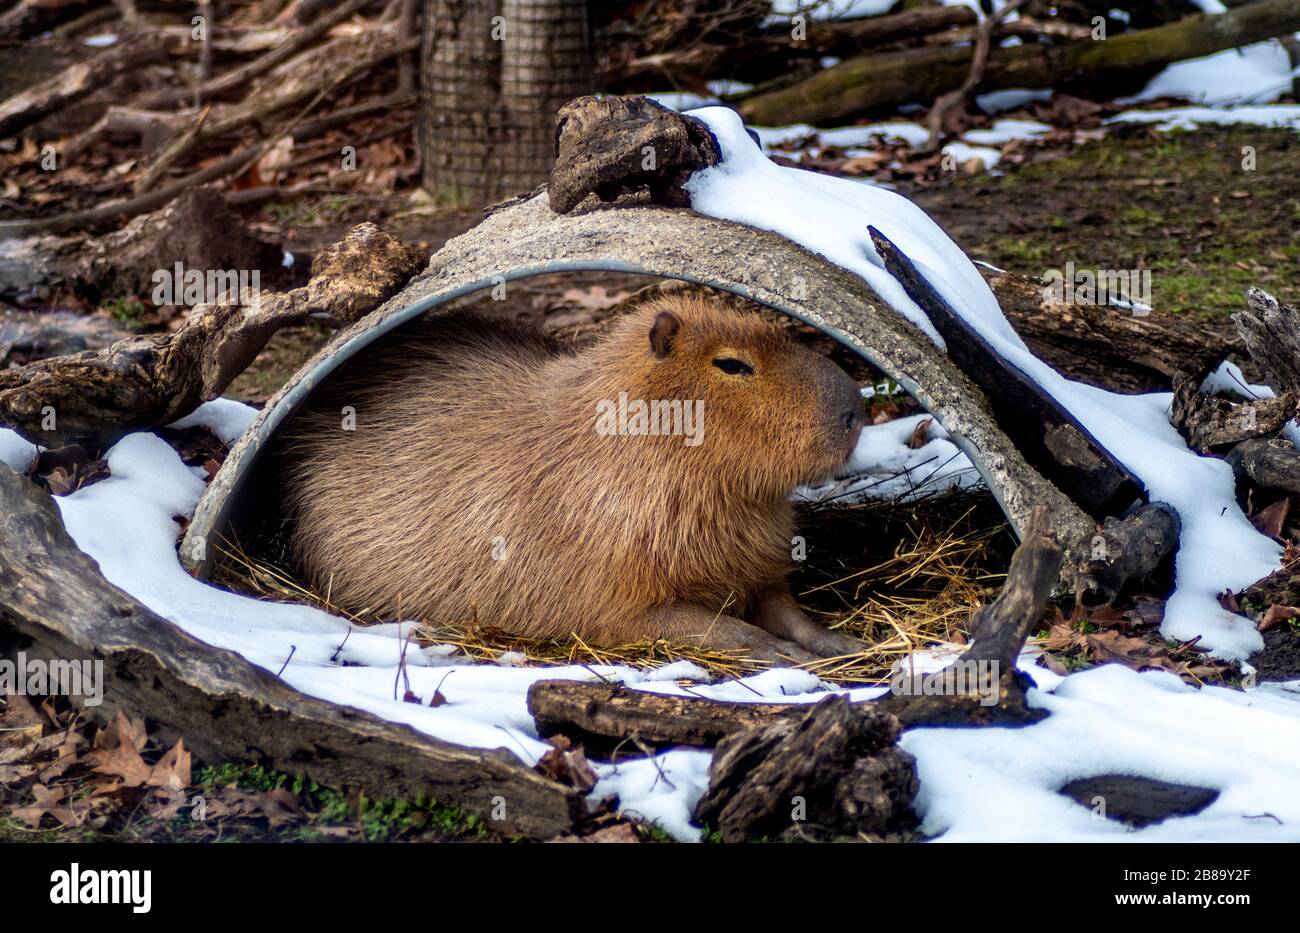 A Capybara is the largest rodent in south america. This one relaxes in an outdoor house at a zoo. Stock Photo